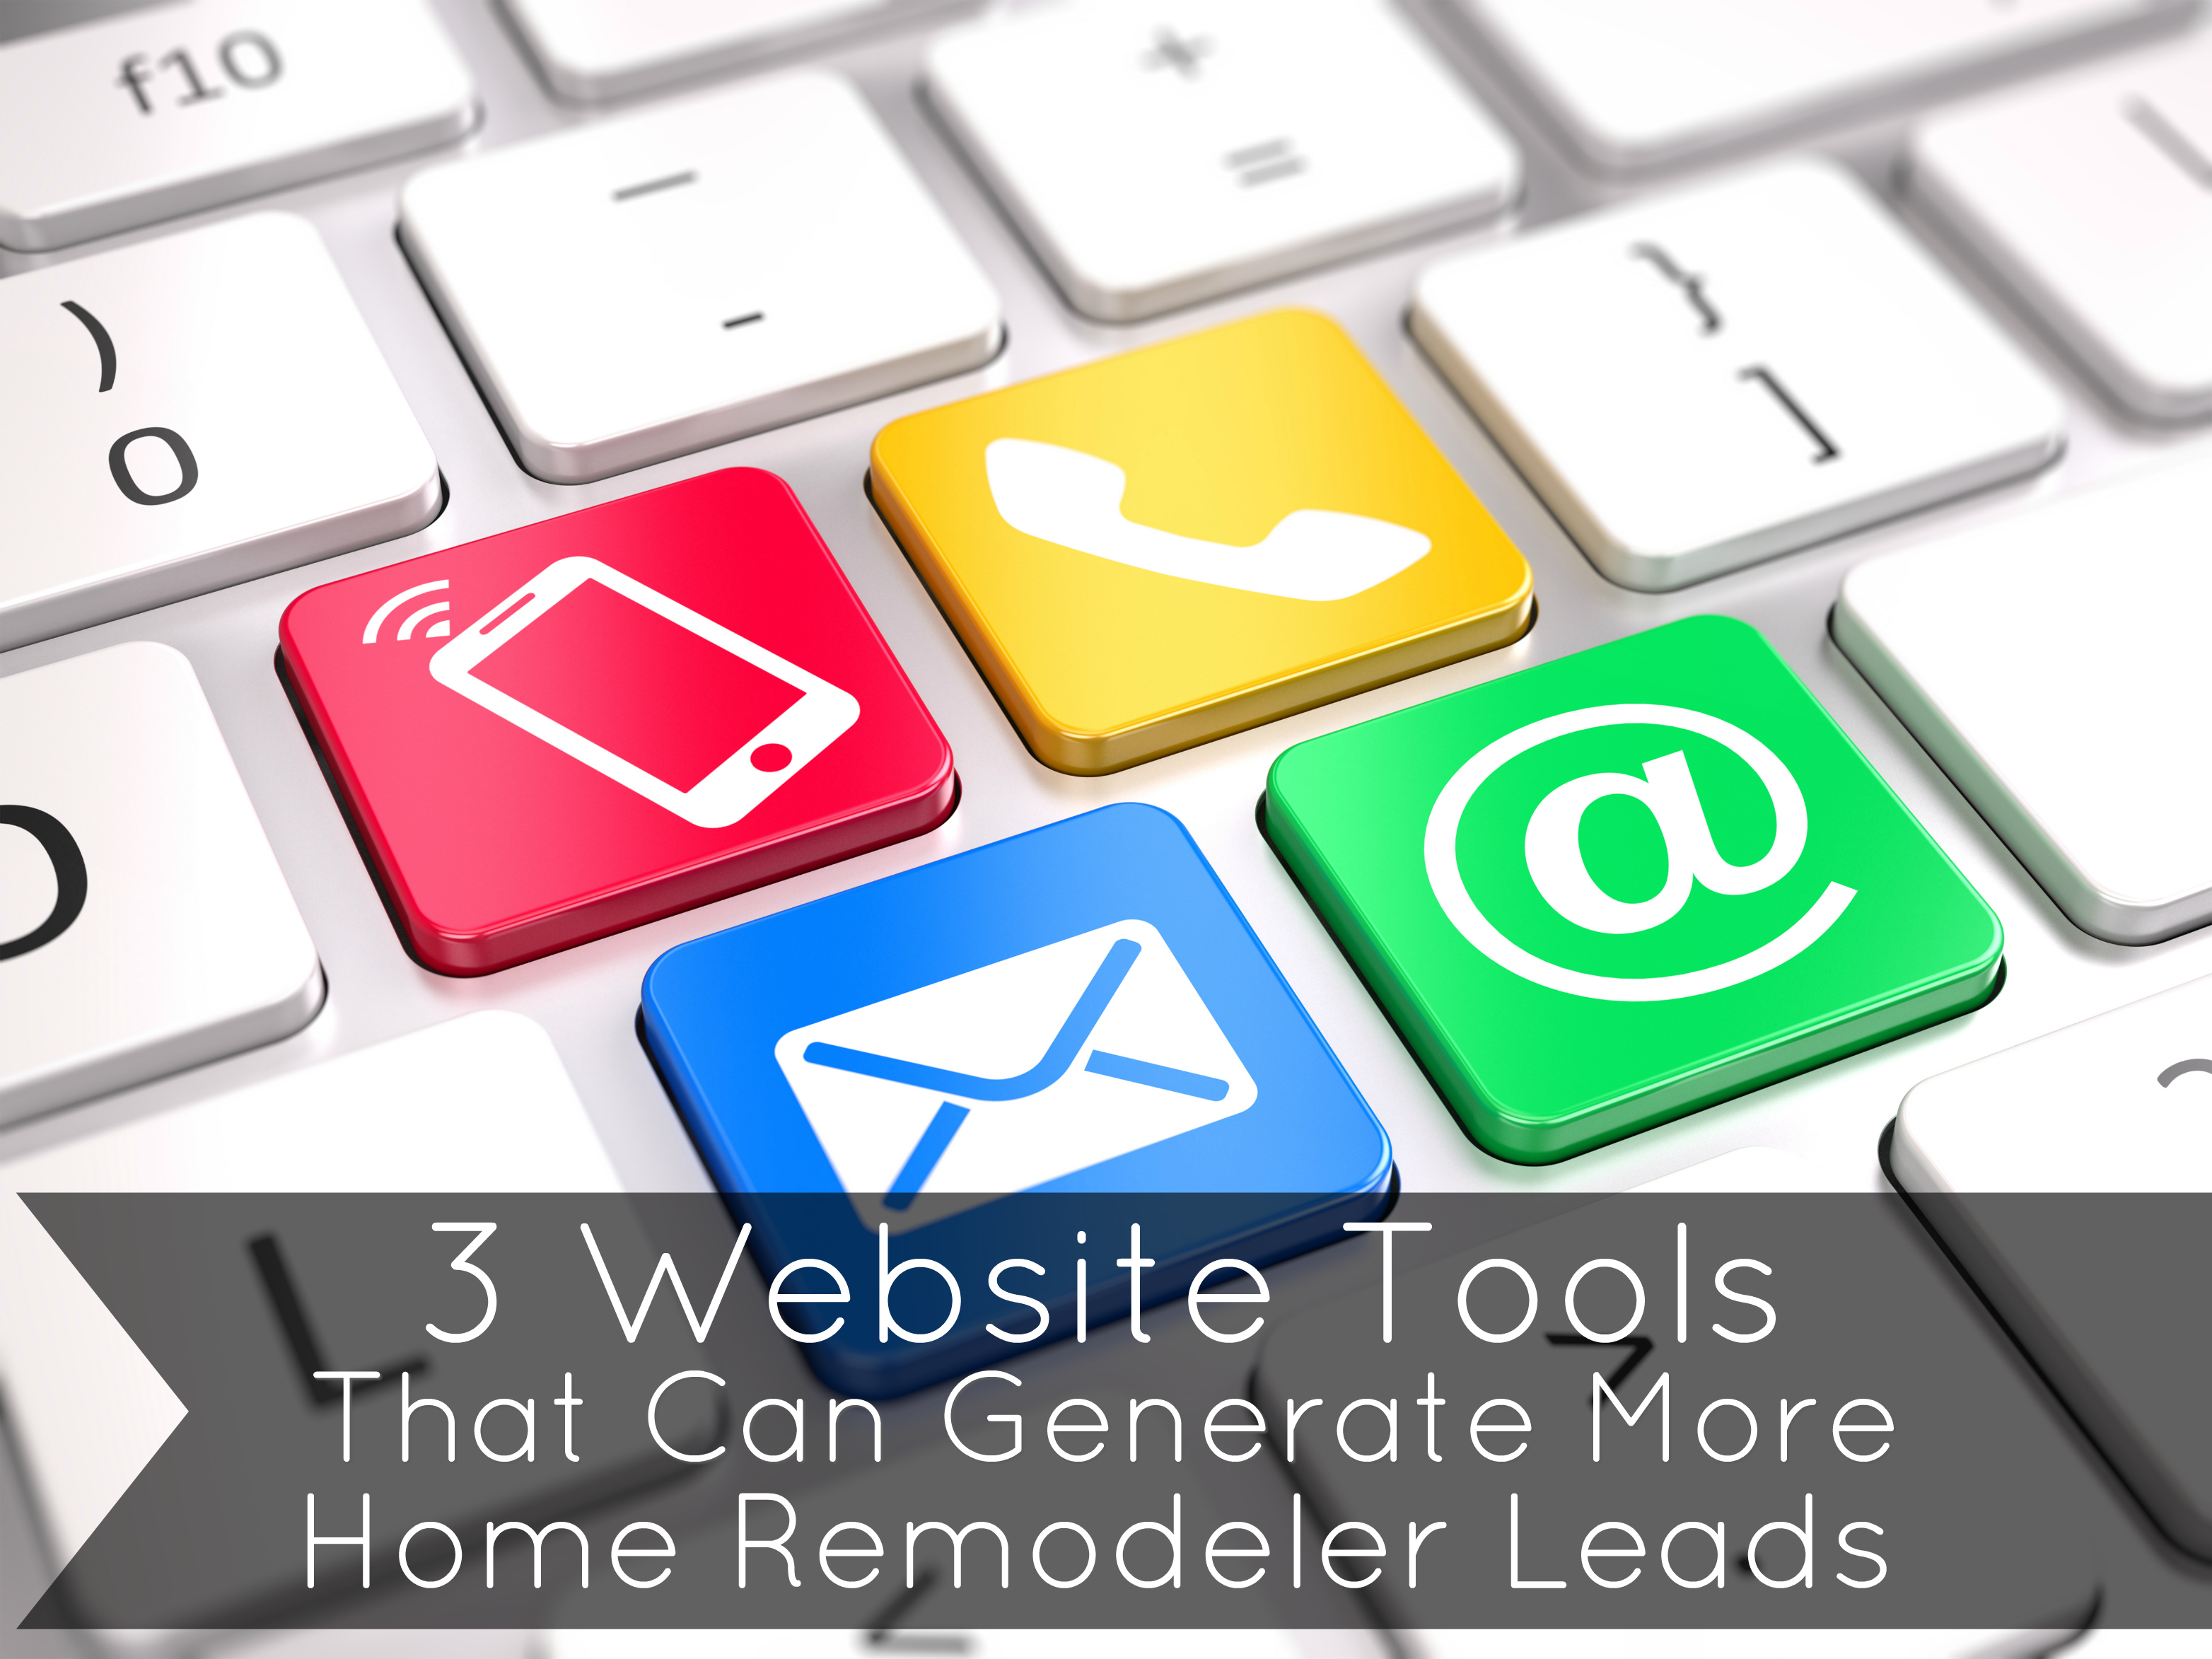 Generate-More-Home-Remodeler-Leads